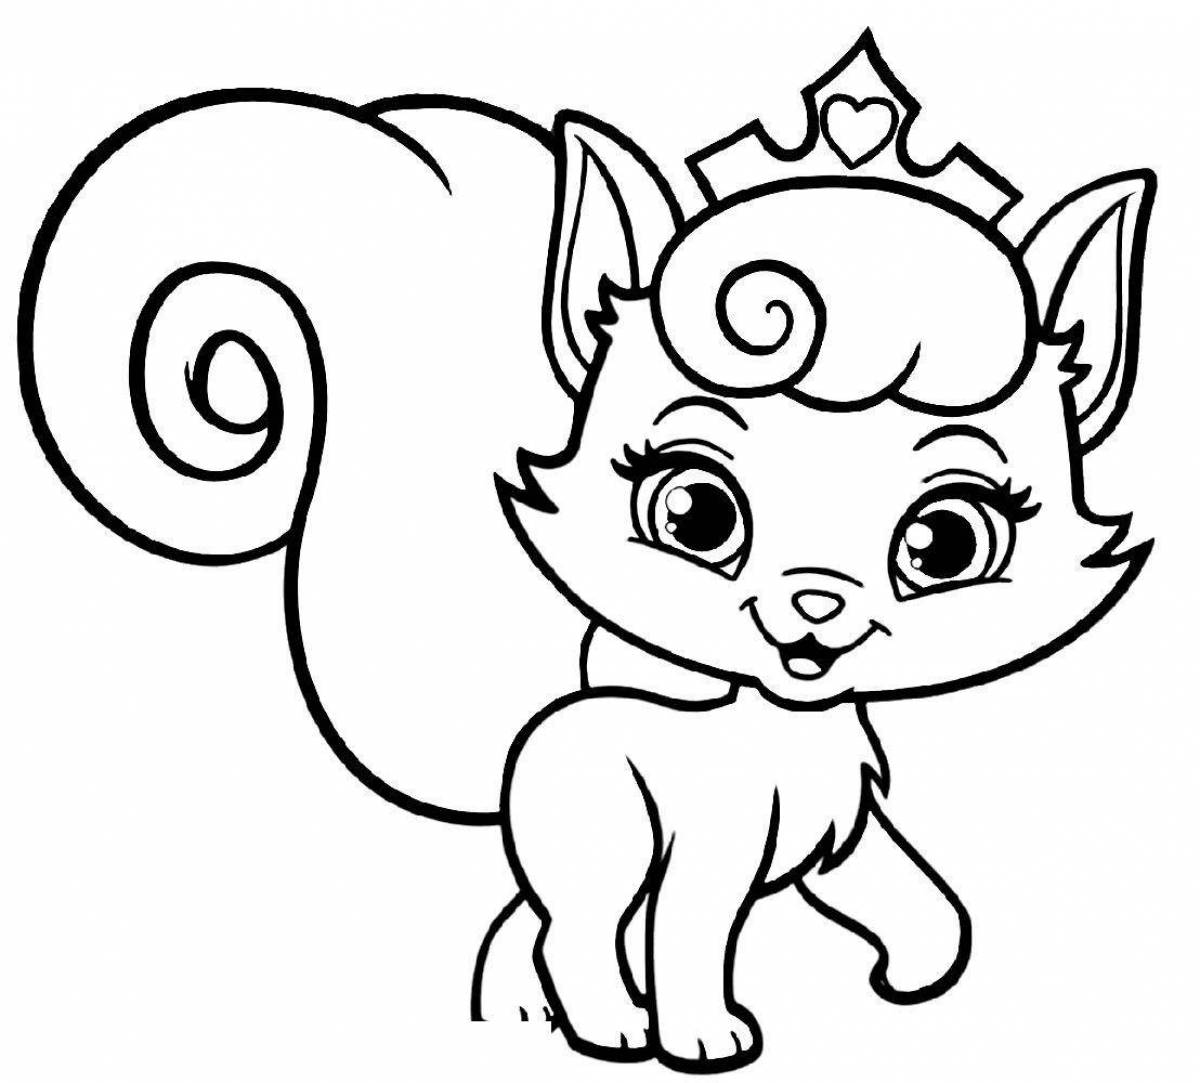 Coloring pages kittens dogs for children 3 4 years old